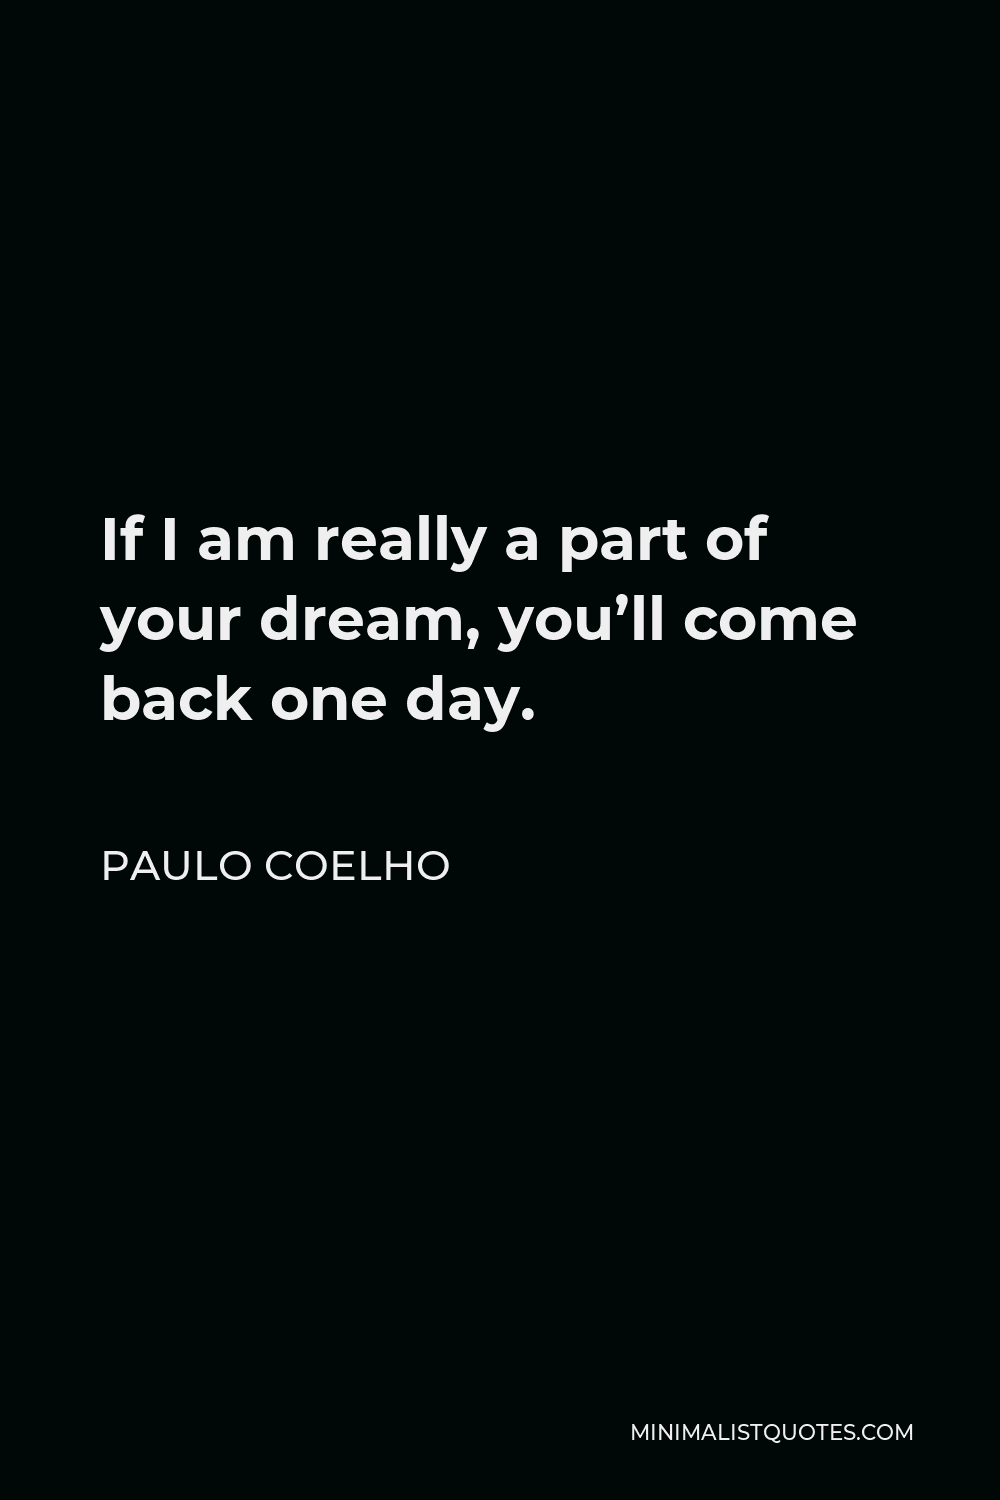 Paulo Coelho Quote - If I am really a part of your dream, you’ll come back one day.